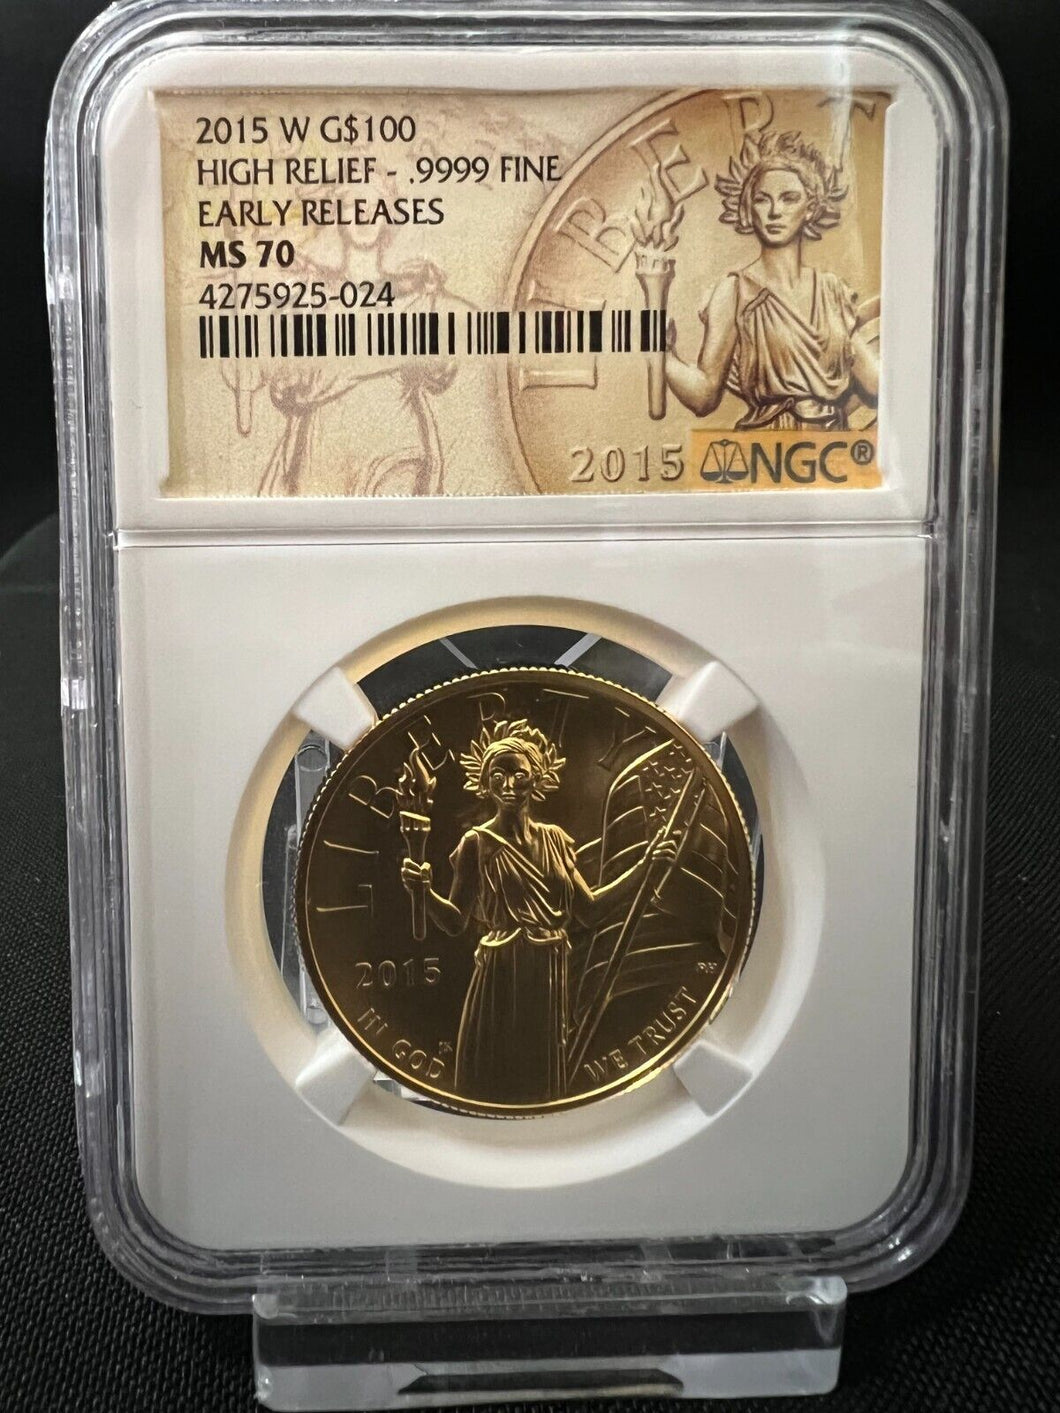 2015 W $100 American Liberty High Relief Series NGC MS70 Early Release